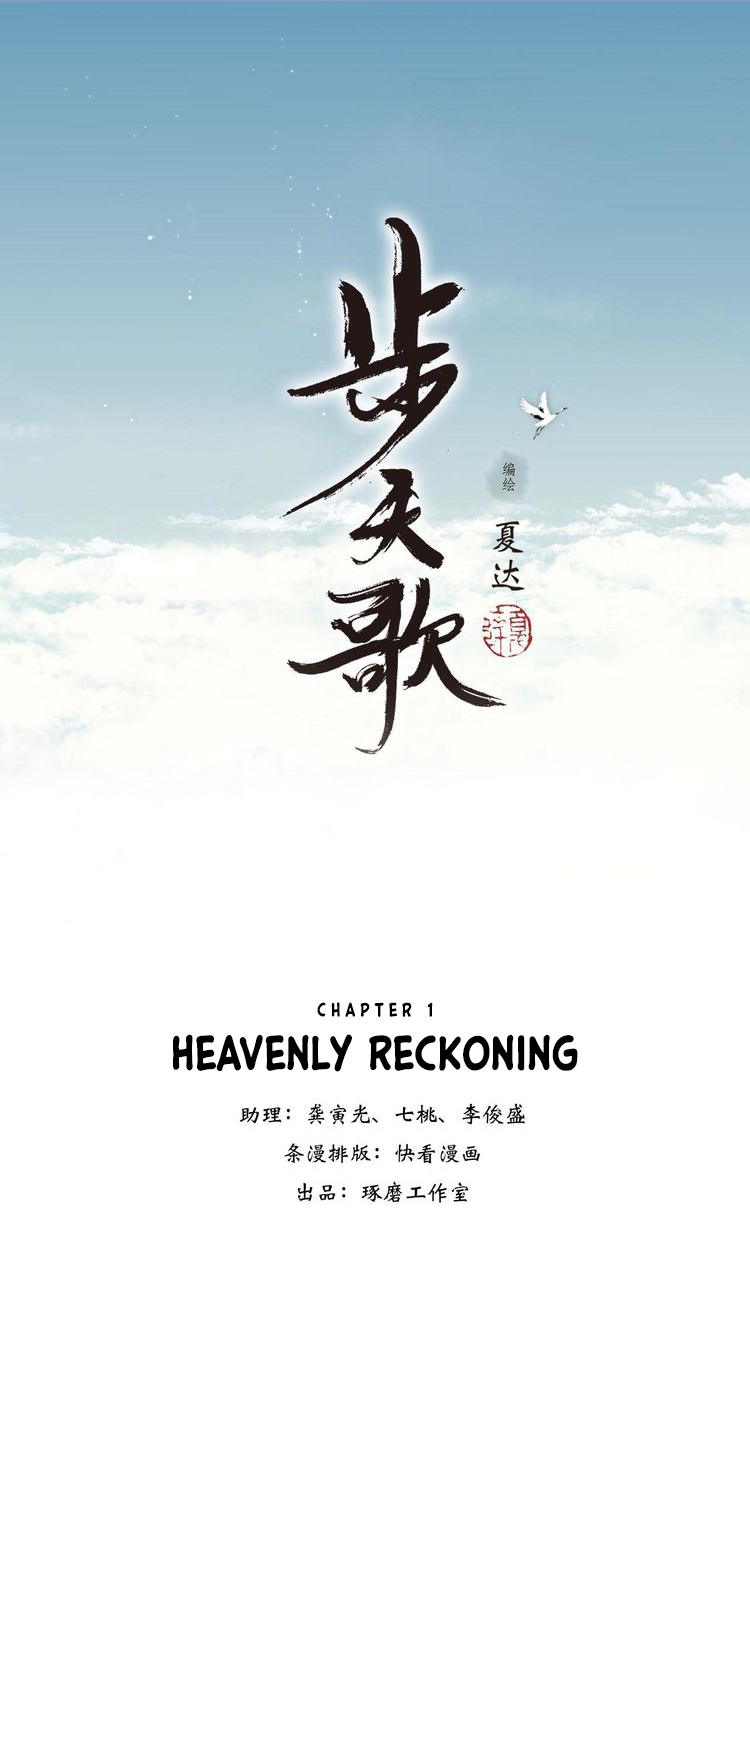 Song of the Sky Walkers Chapter 01